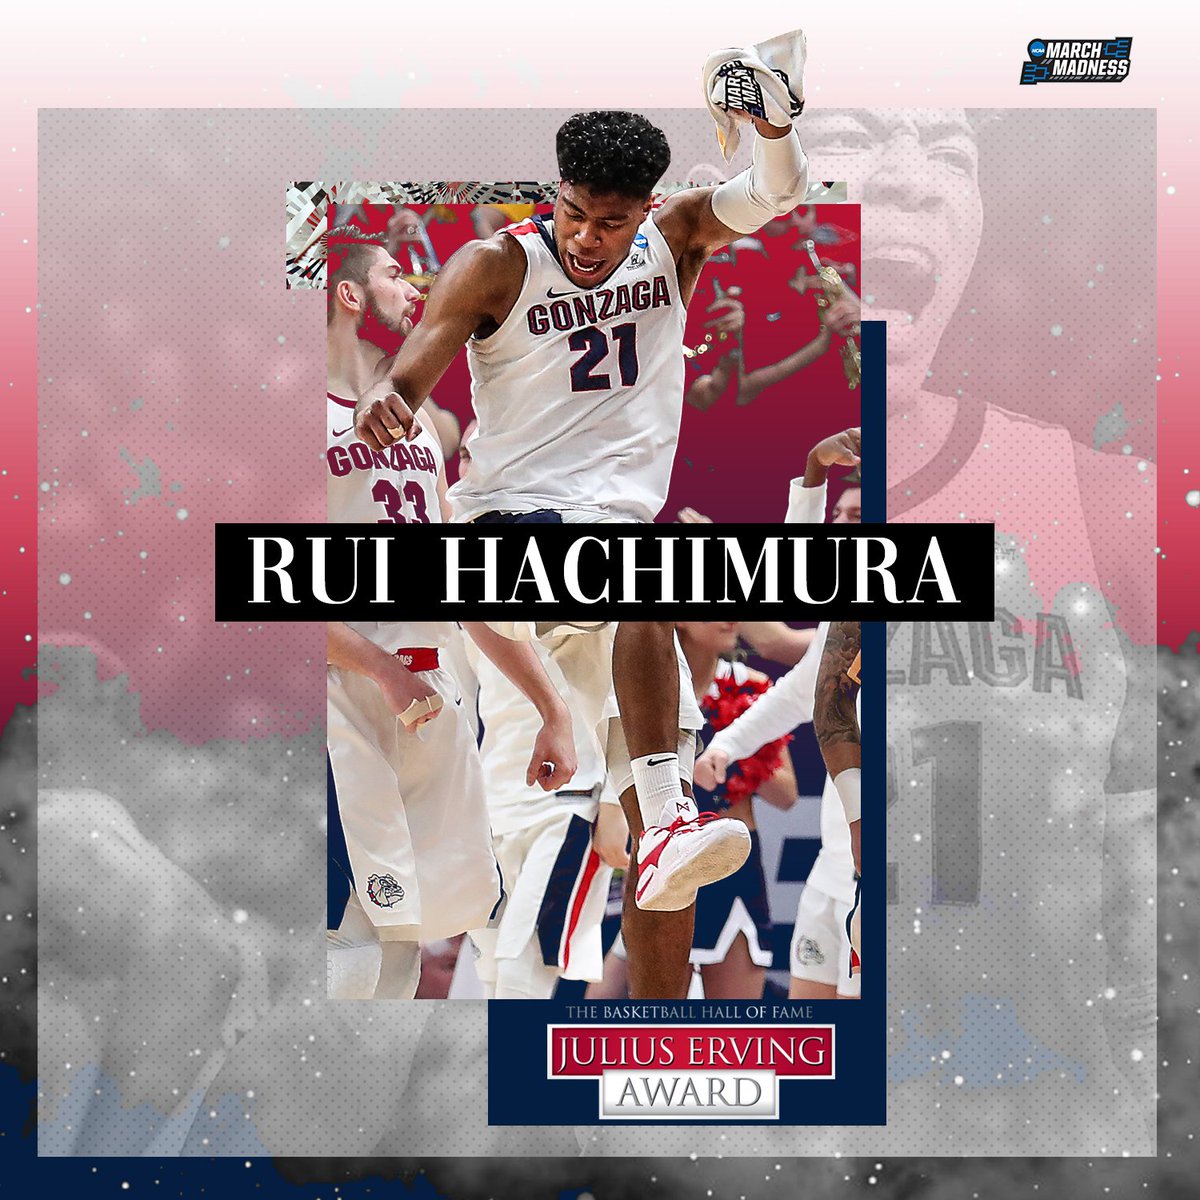 Rui Hachimura is the top small forward in the country! 

Congrats to the Gonzaga junior on taking home the #ErvingAward! 🏆